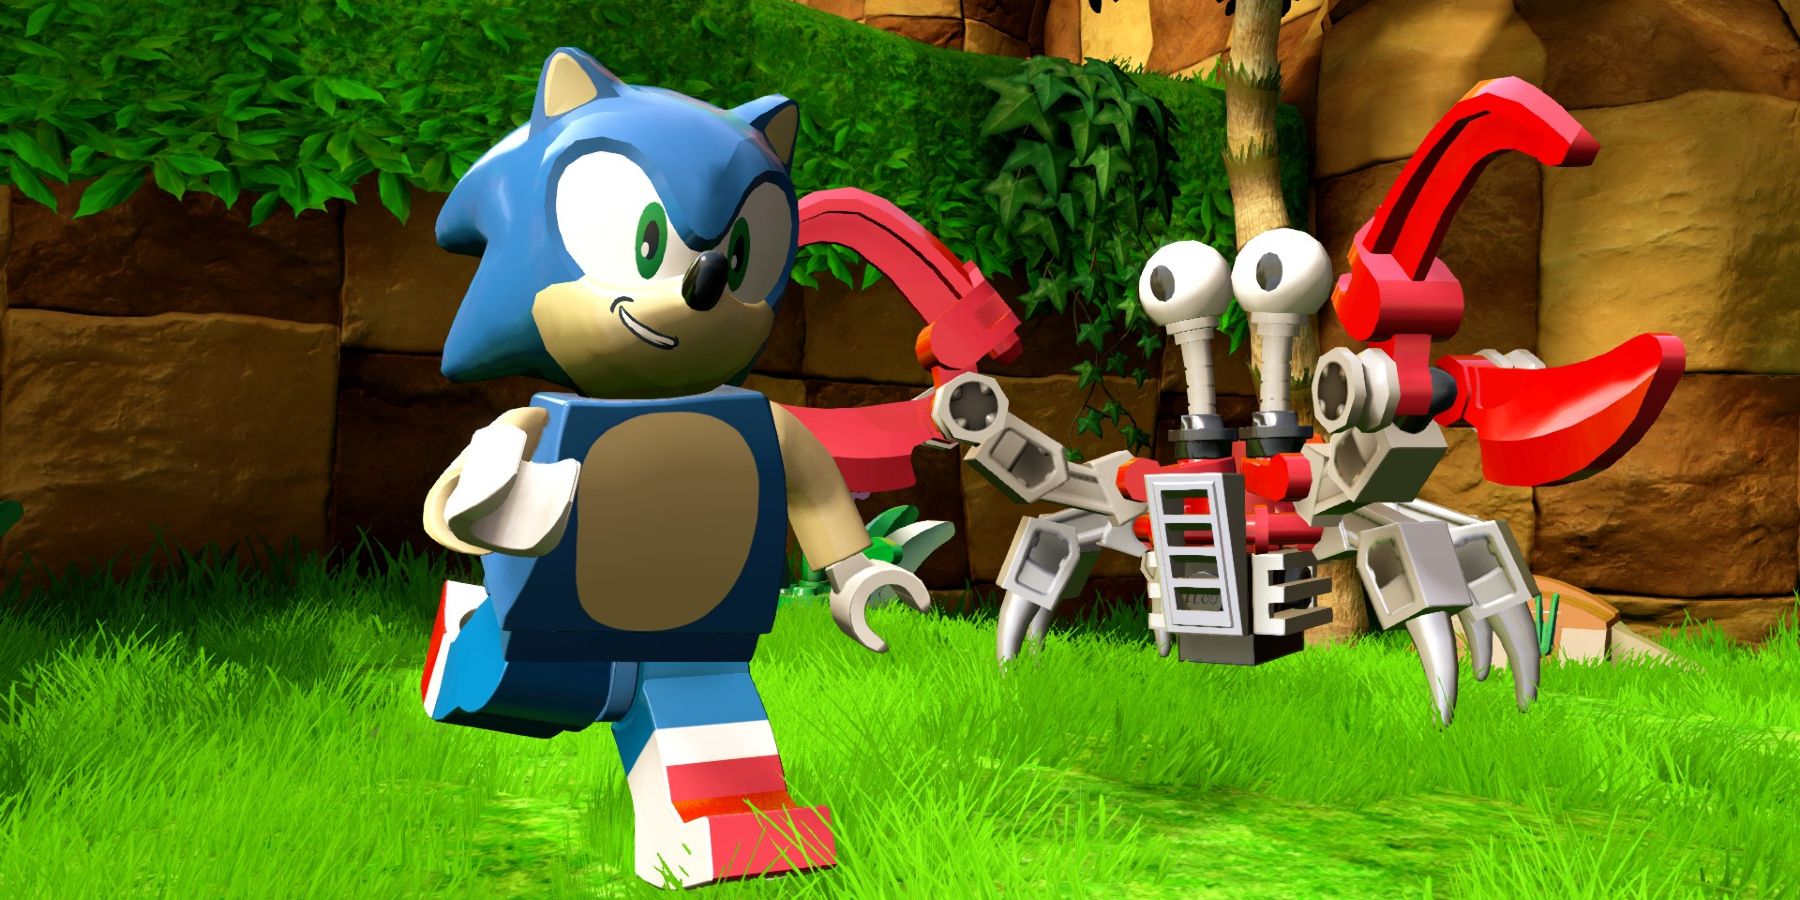 Lego Sonic the Hedgehog Set Release Date Revealed